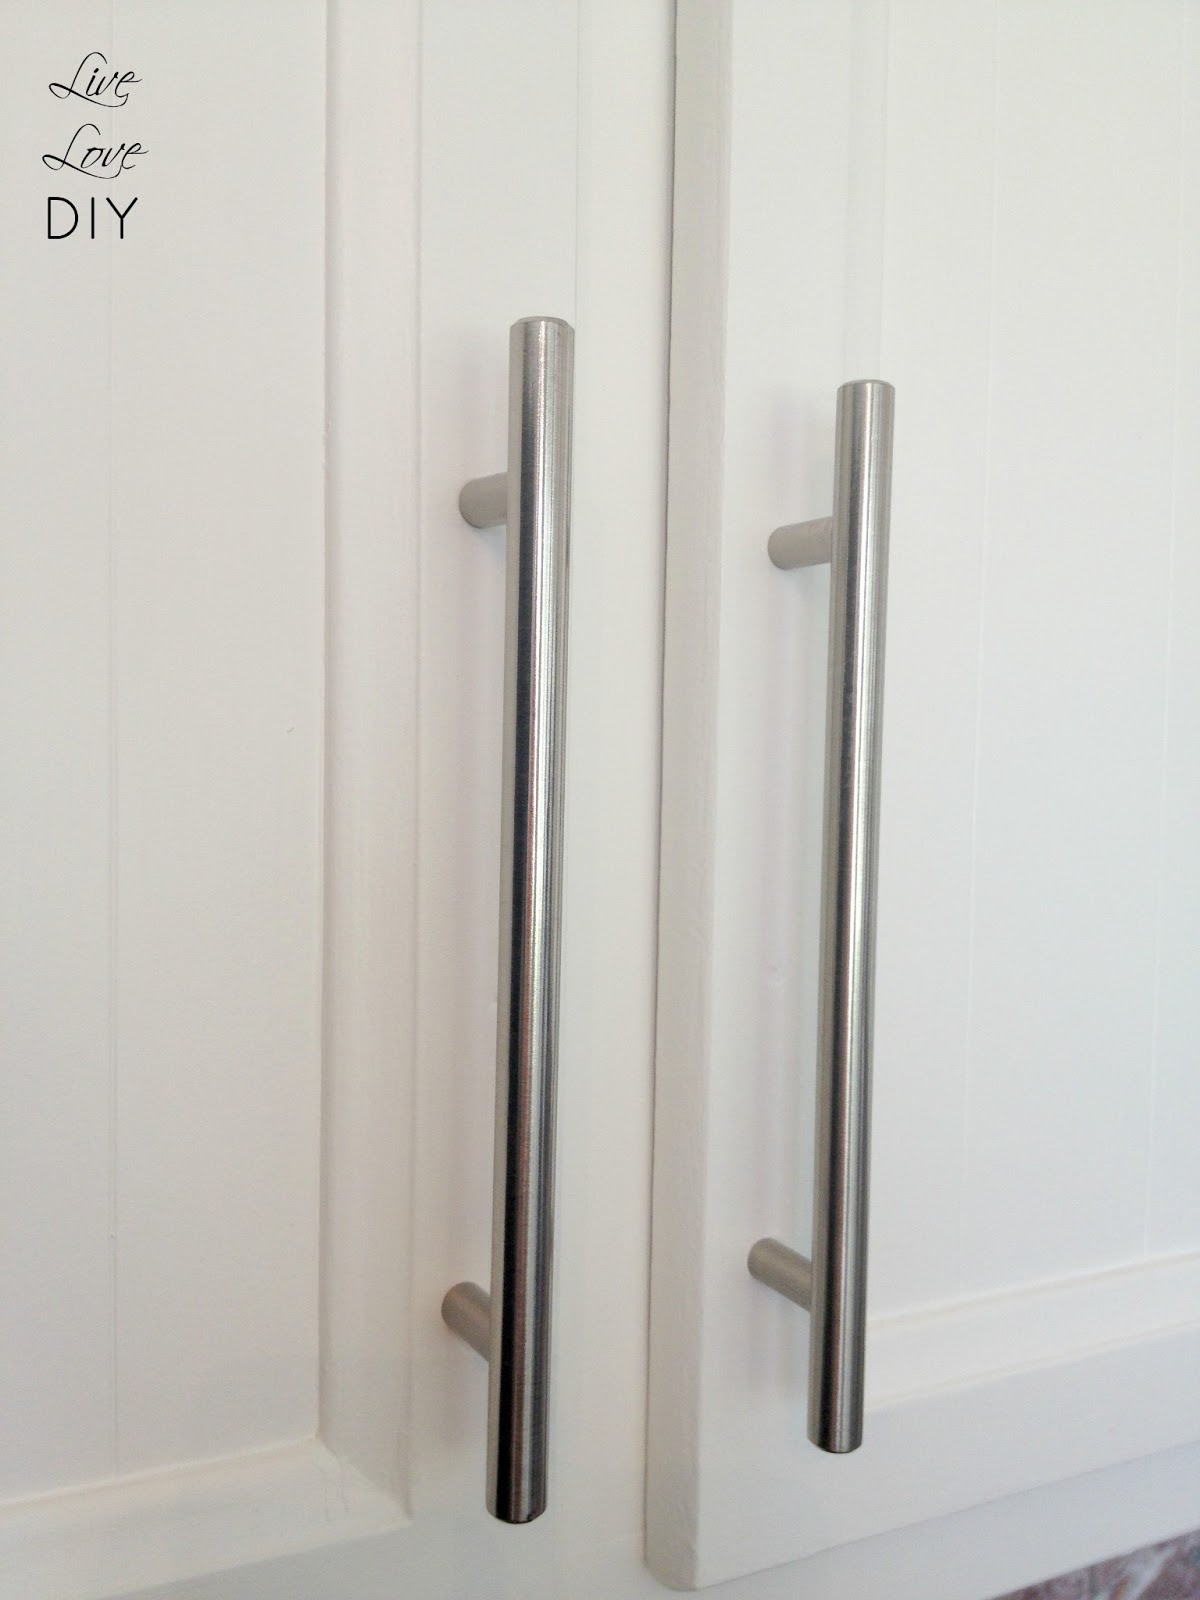 Livelovediy How To Paint Kitchen Cabinets In 10 Easy Steps